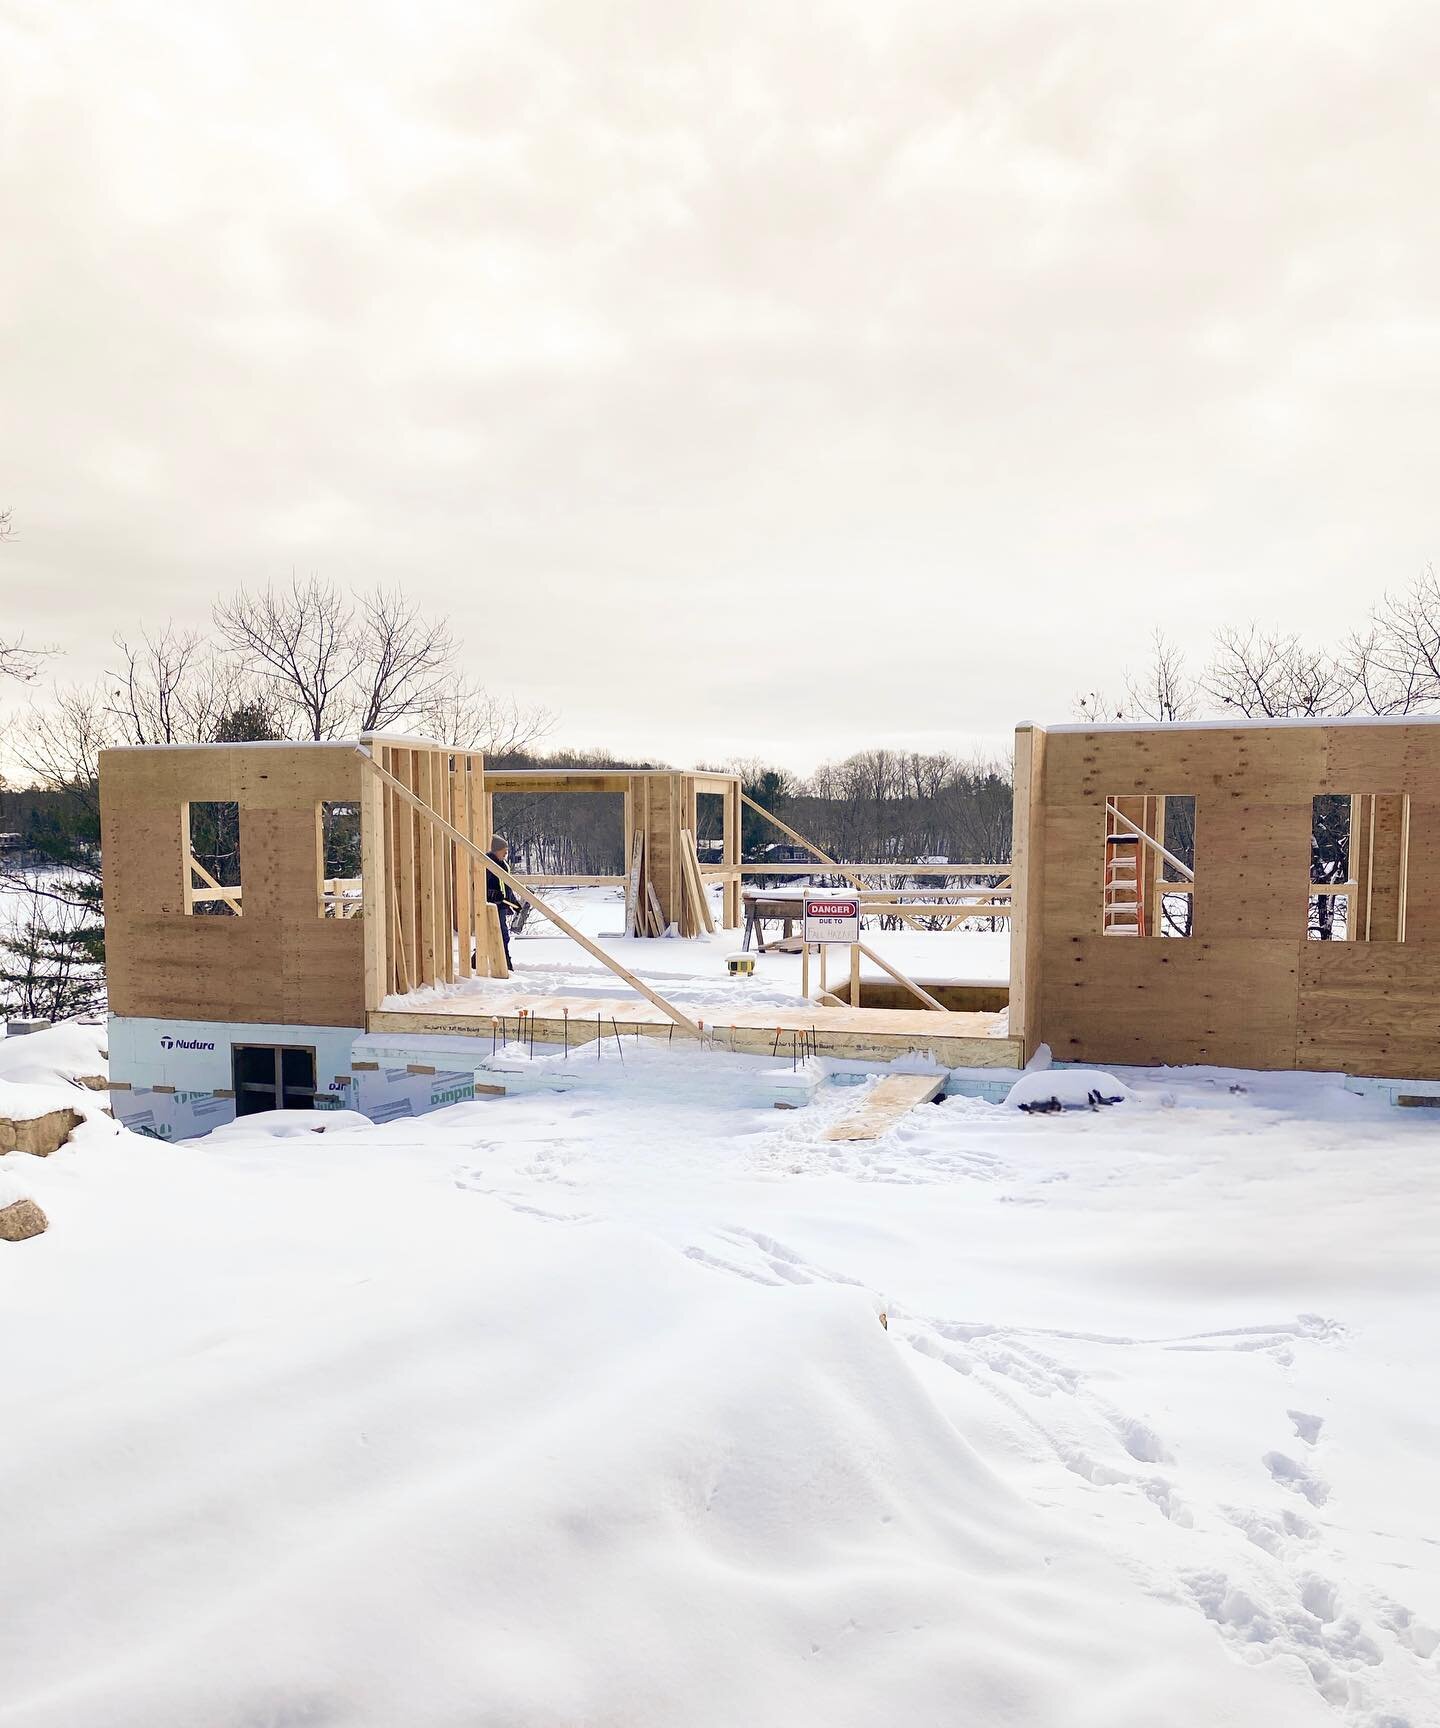 Walls on the main floor are finally going up at #projectlakehouse thanks to this mild winter! (Let&rsquo;s hope it continues) 

Also look at that view😍